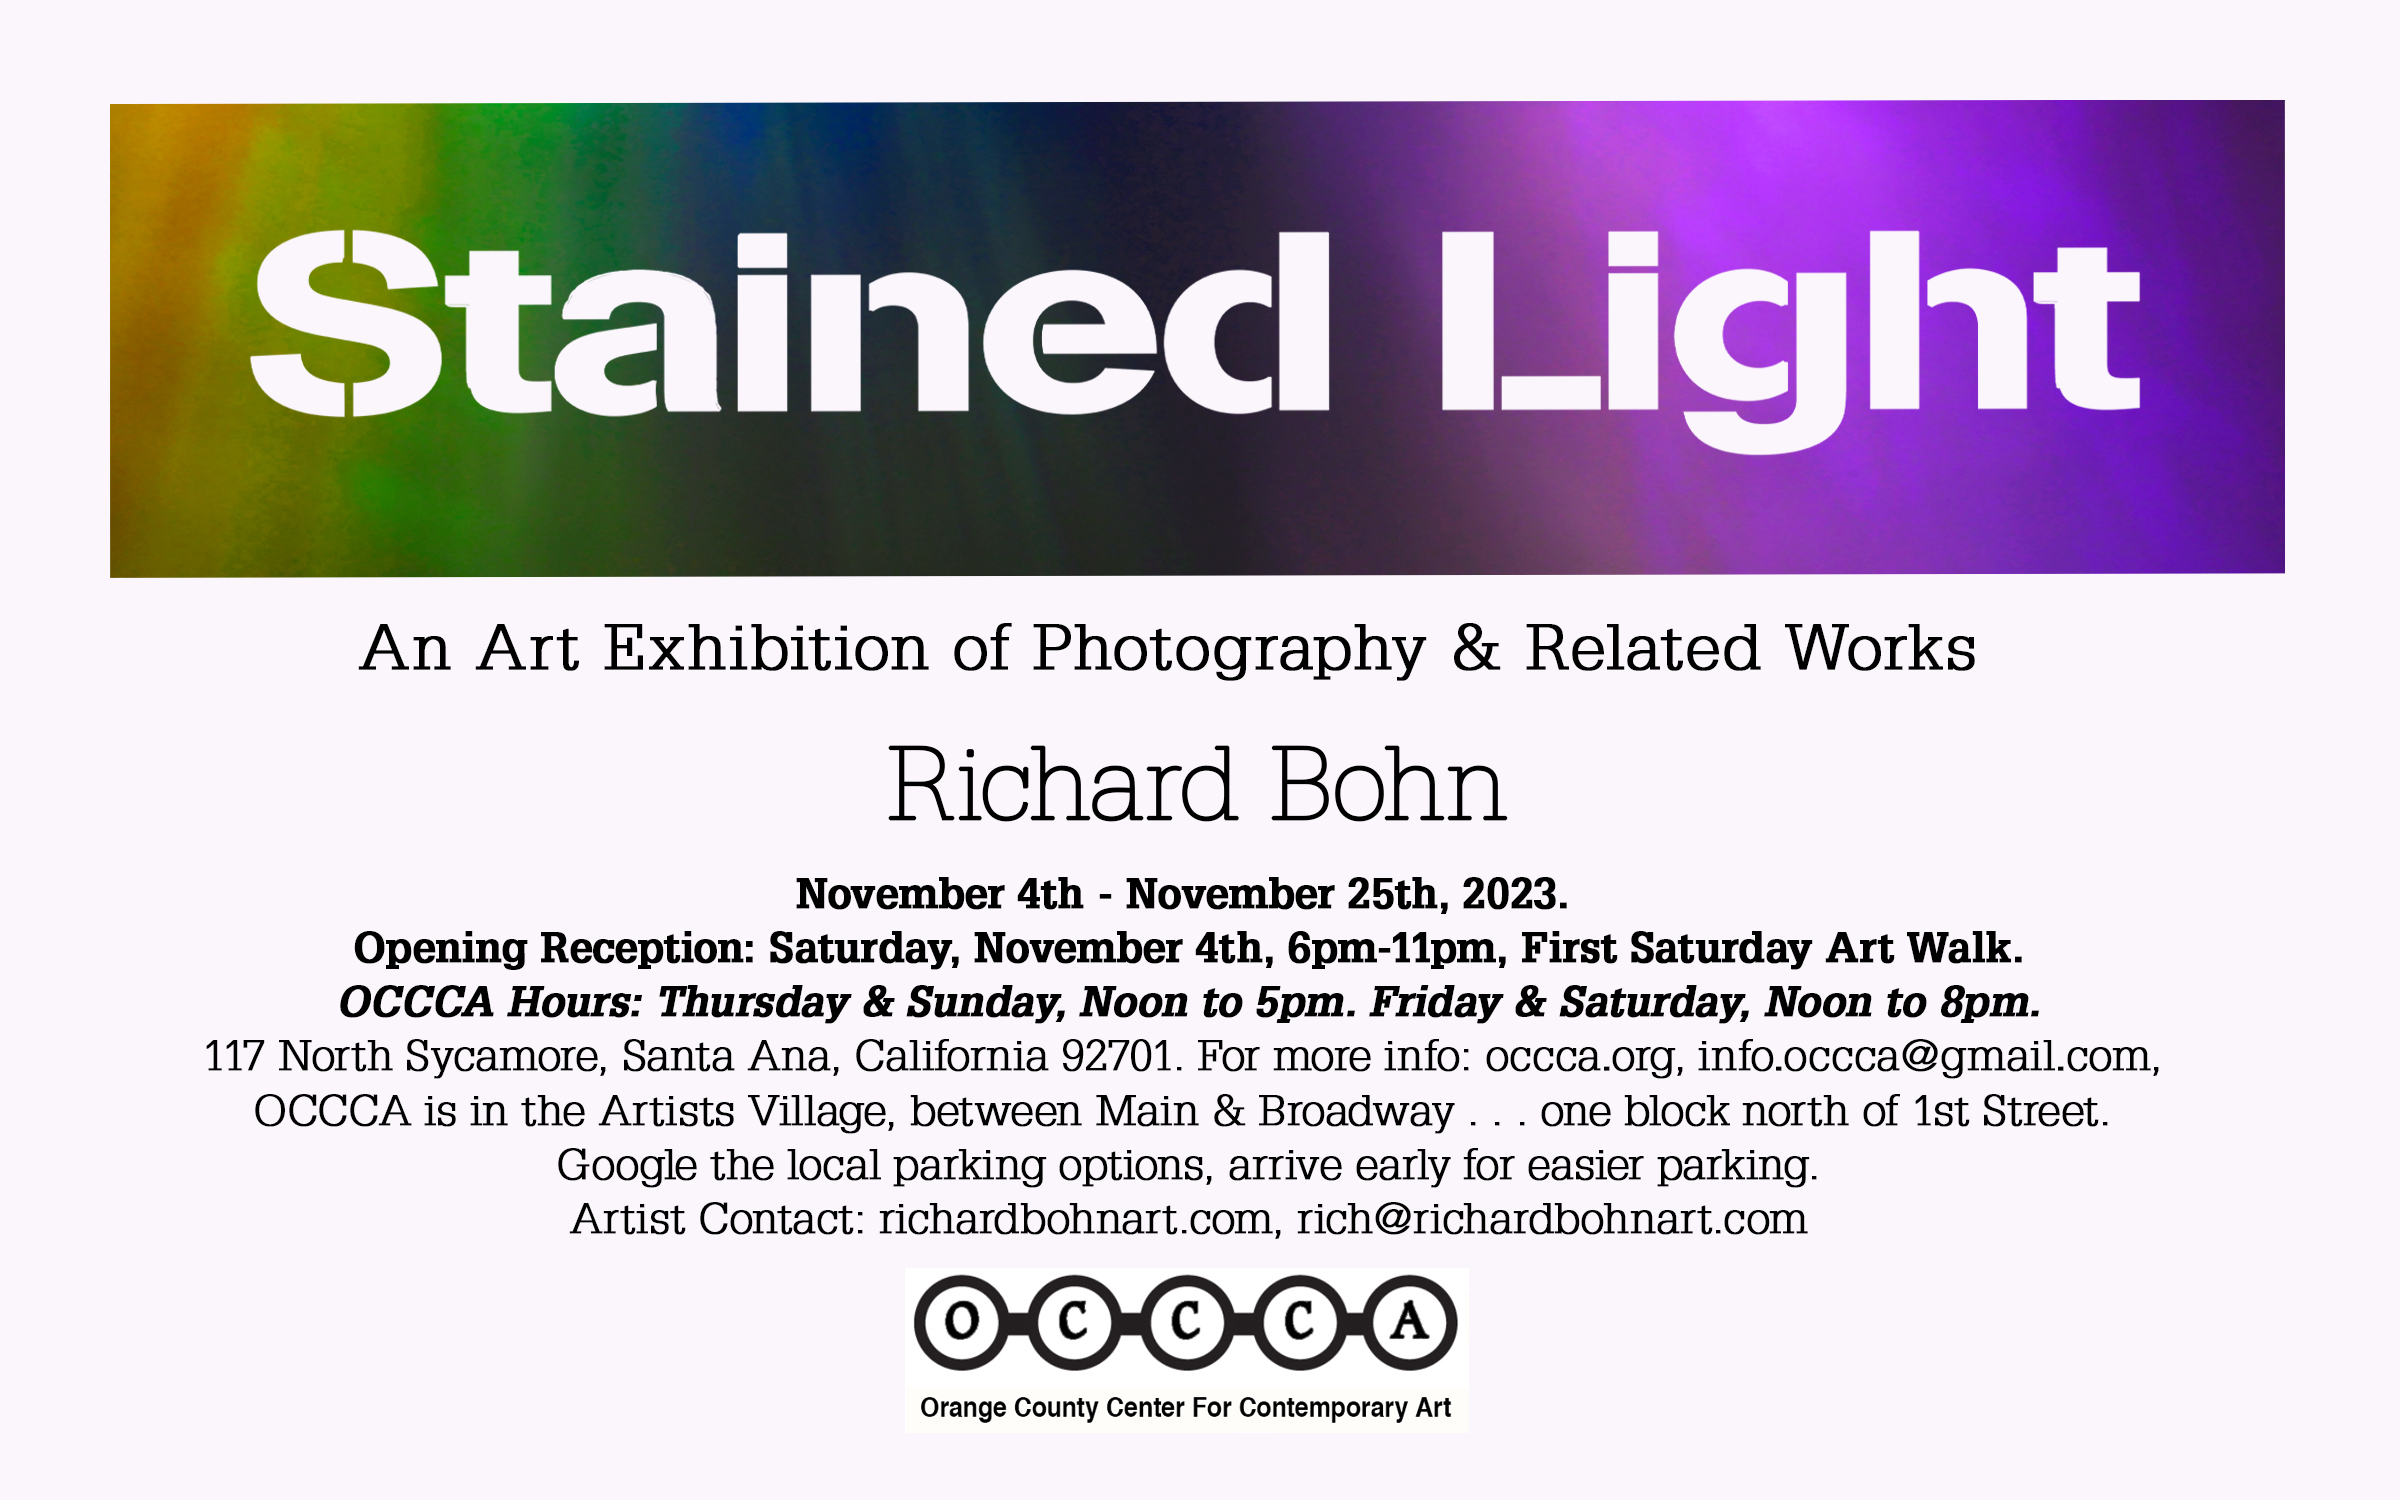 Stained Light exhibition announcement